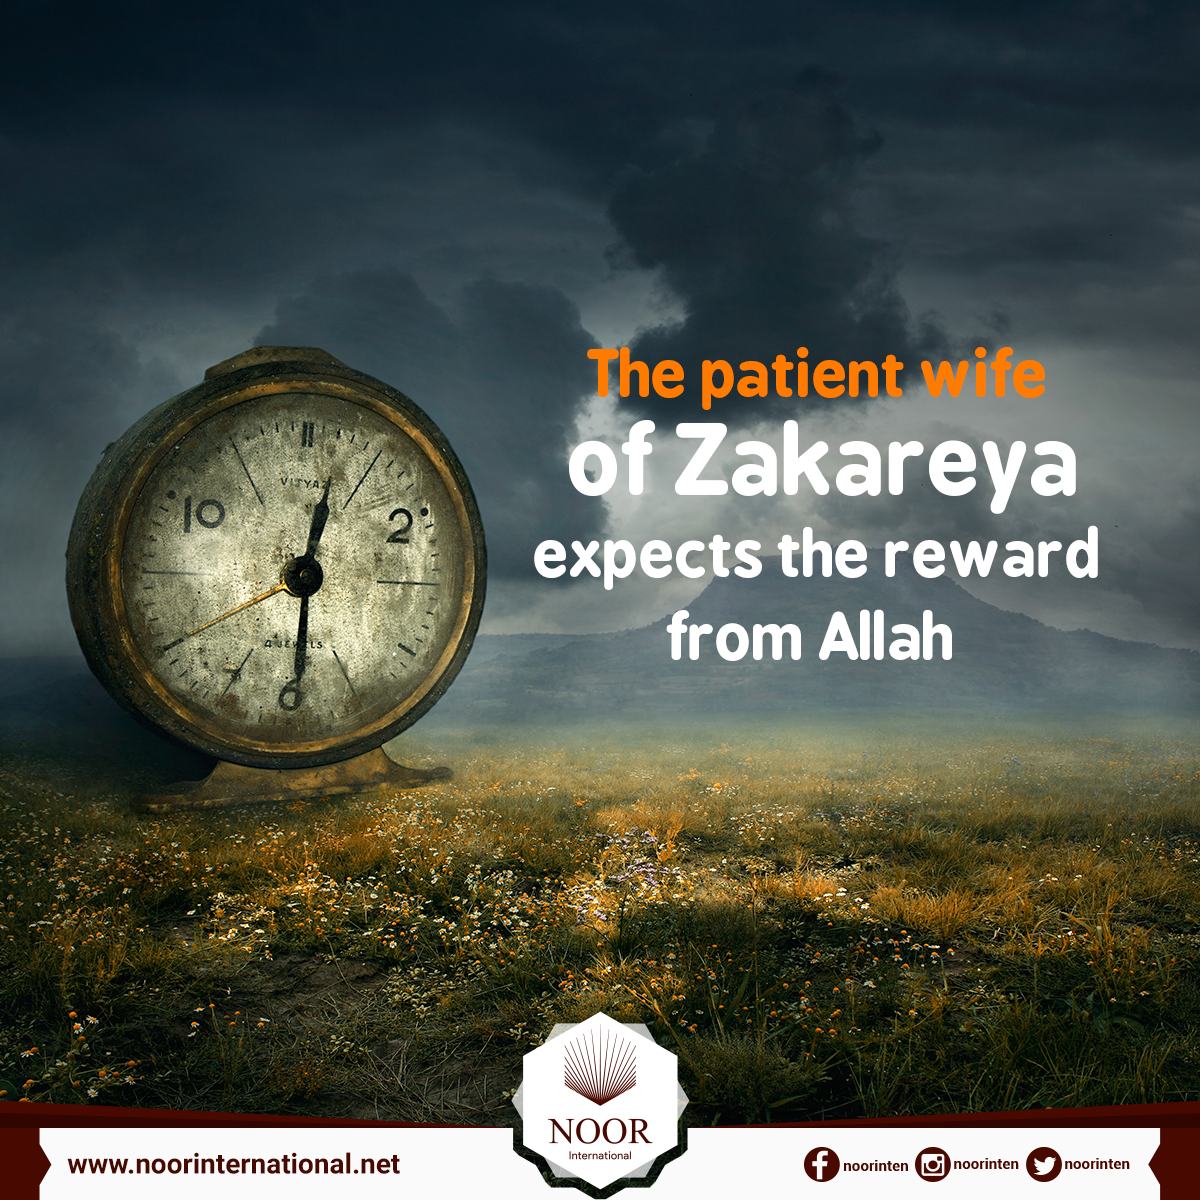 The patient wife of Zakareya expects the reward from Allah